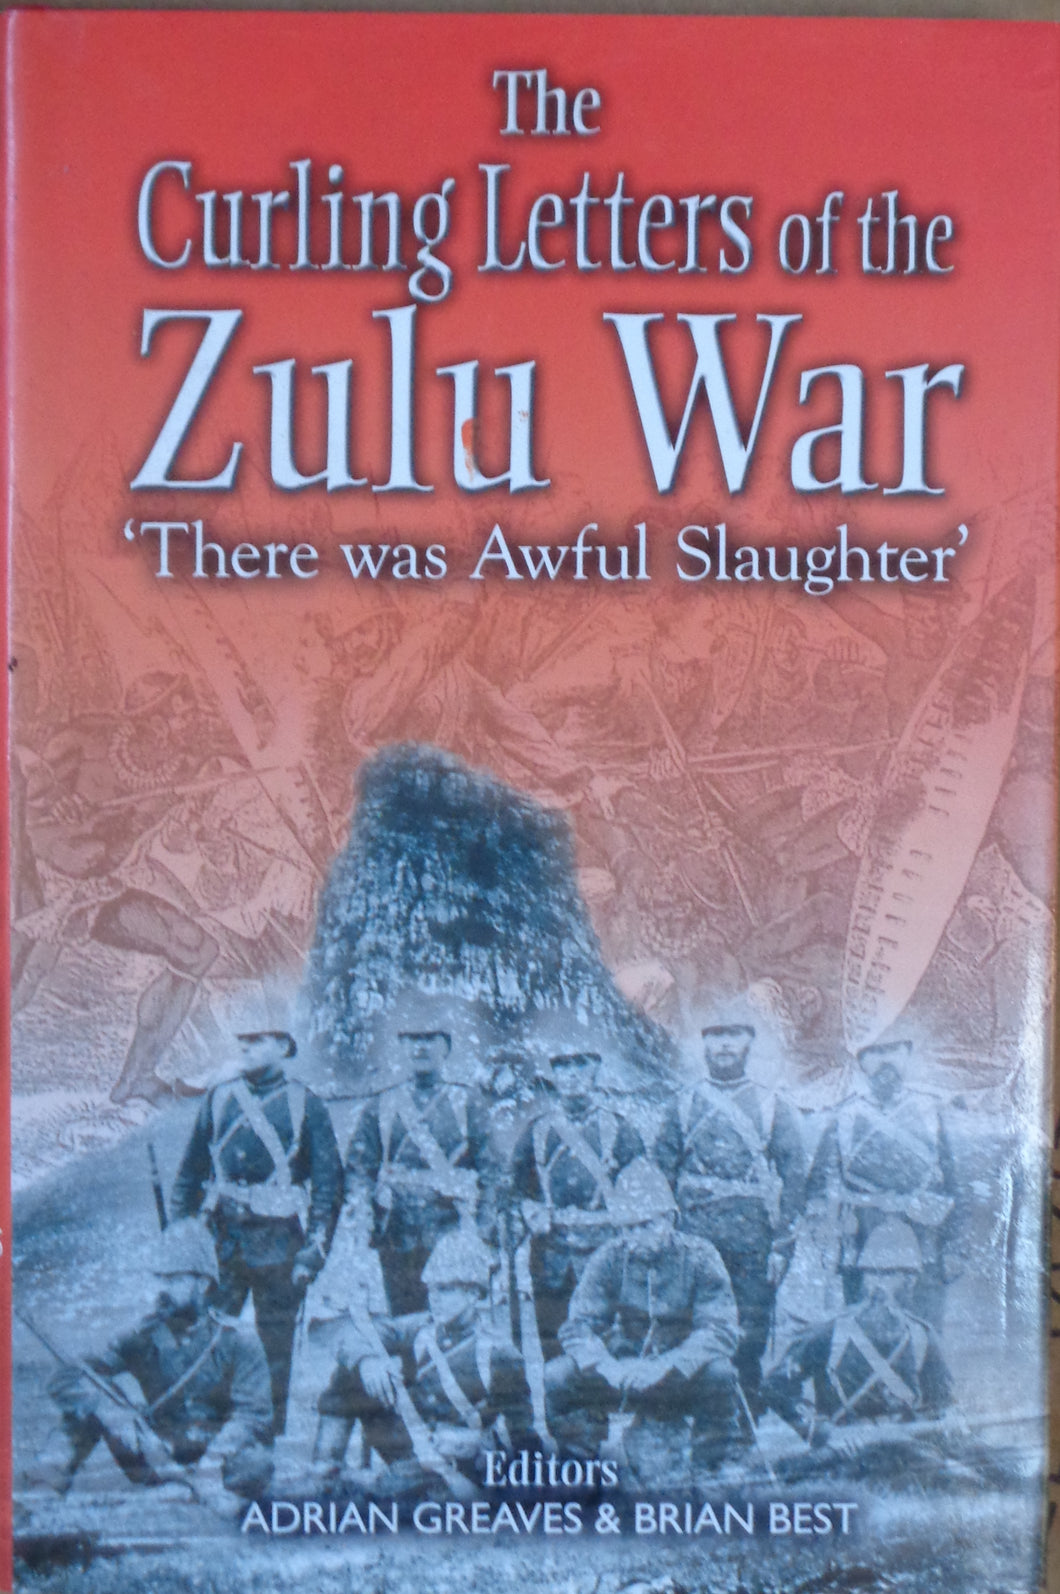 'THE CURLING LETTERS OF THE ZULU WAR; THERE WAS AWFUL SLAUGHTER' edited by Adrian Greaves and Brian Best